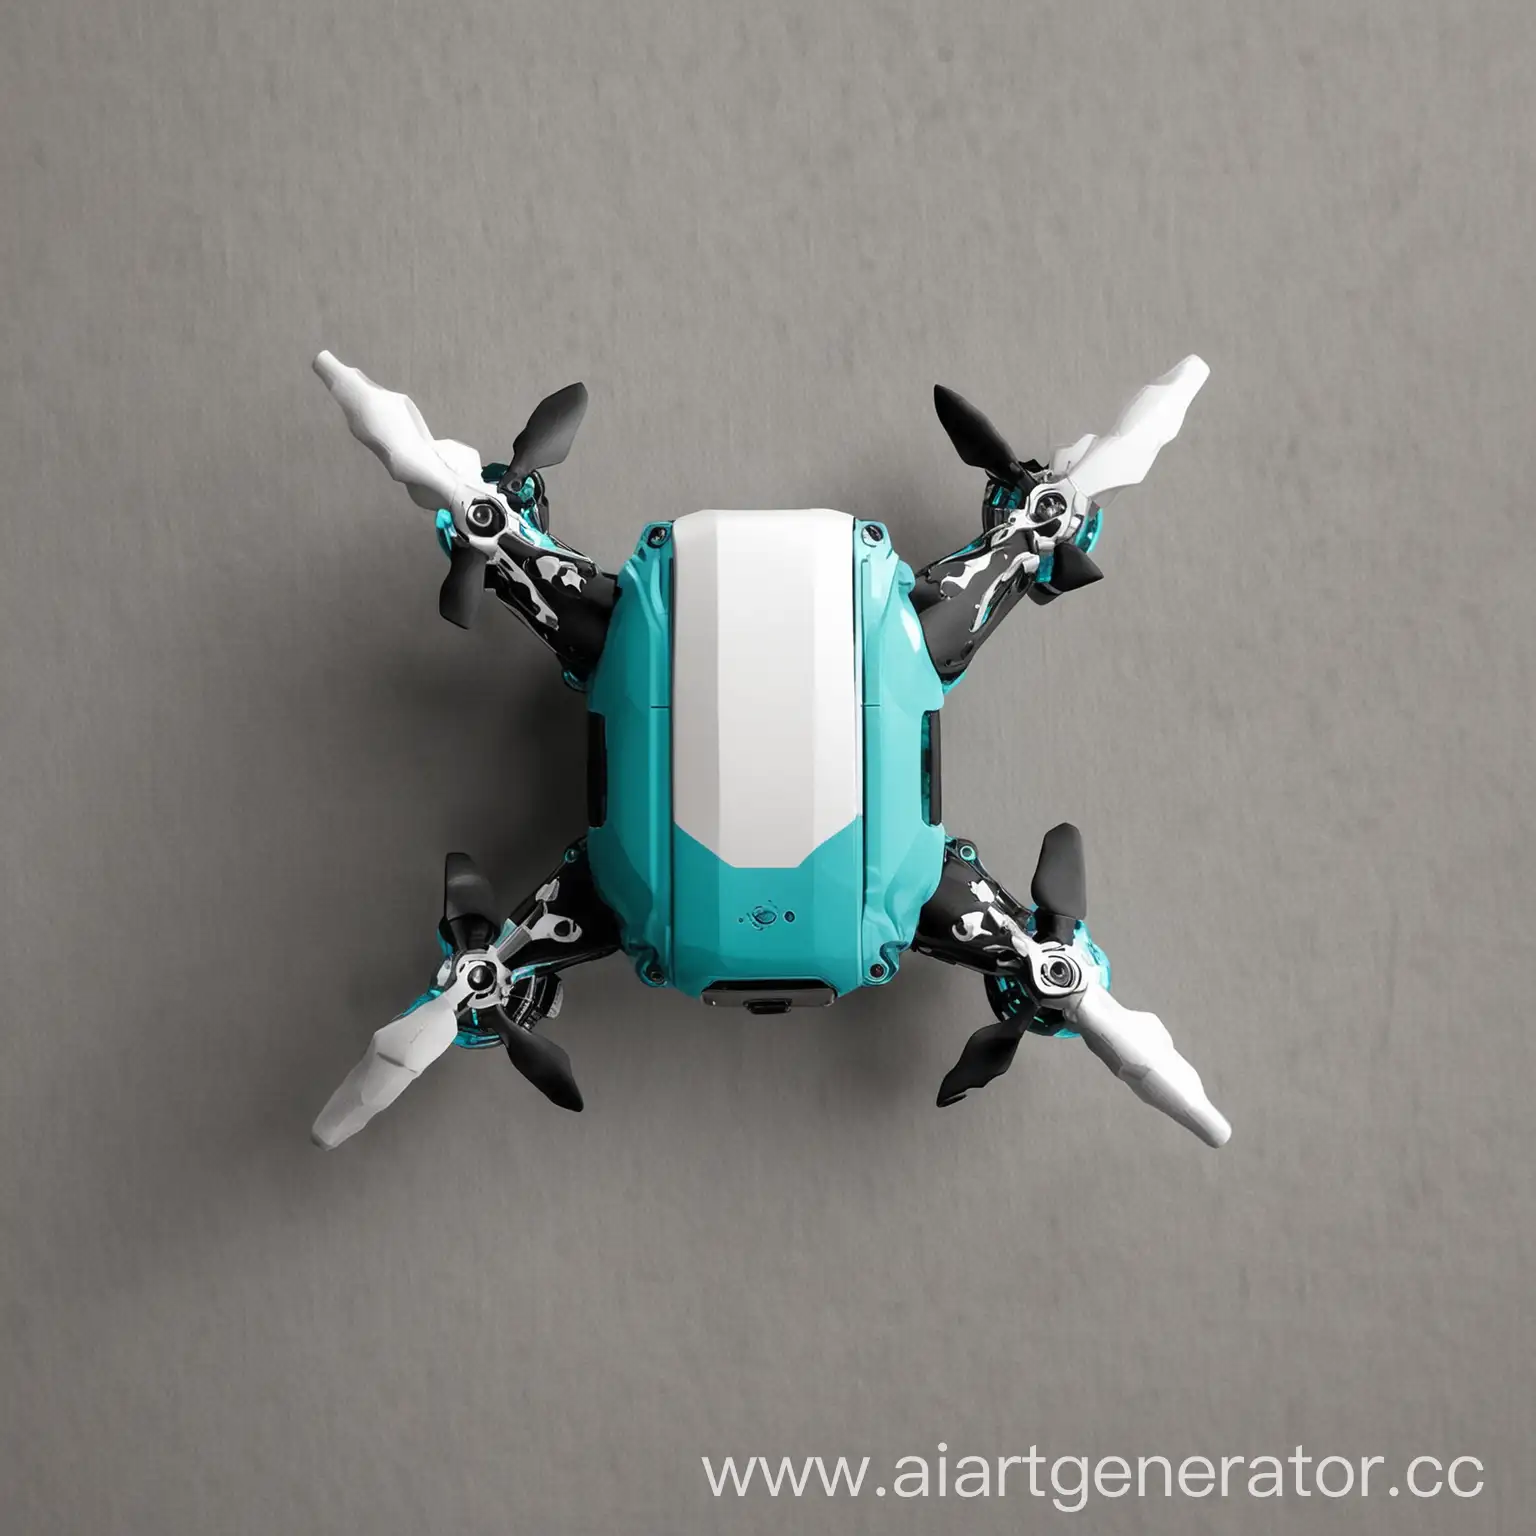 Turquoise-Black-and-White-Mini-Drone-Flying-in-Urban-Setting